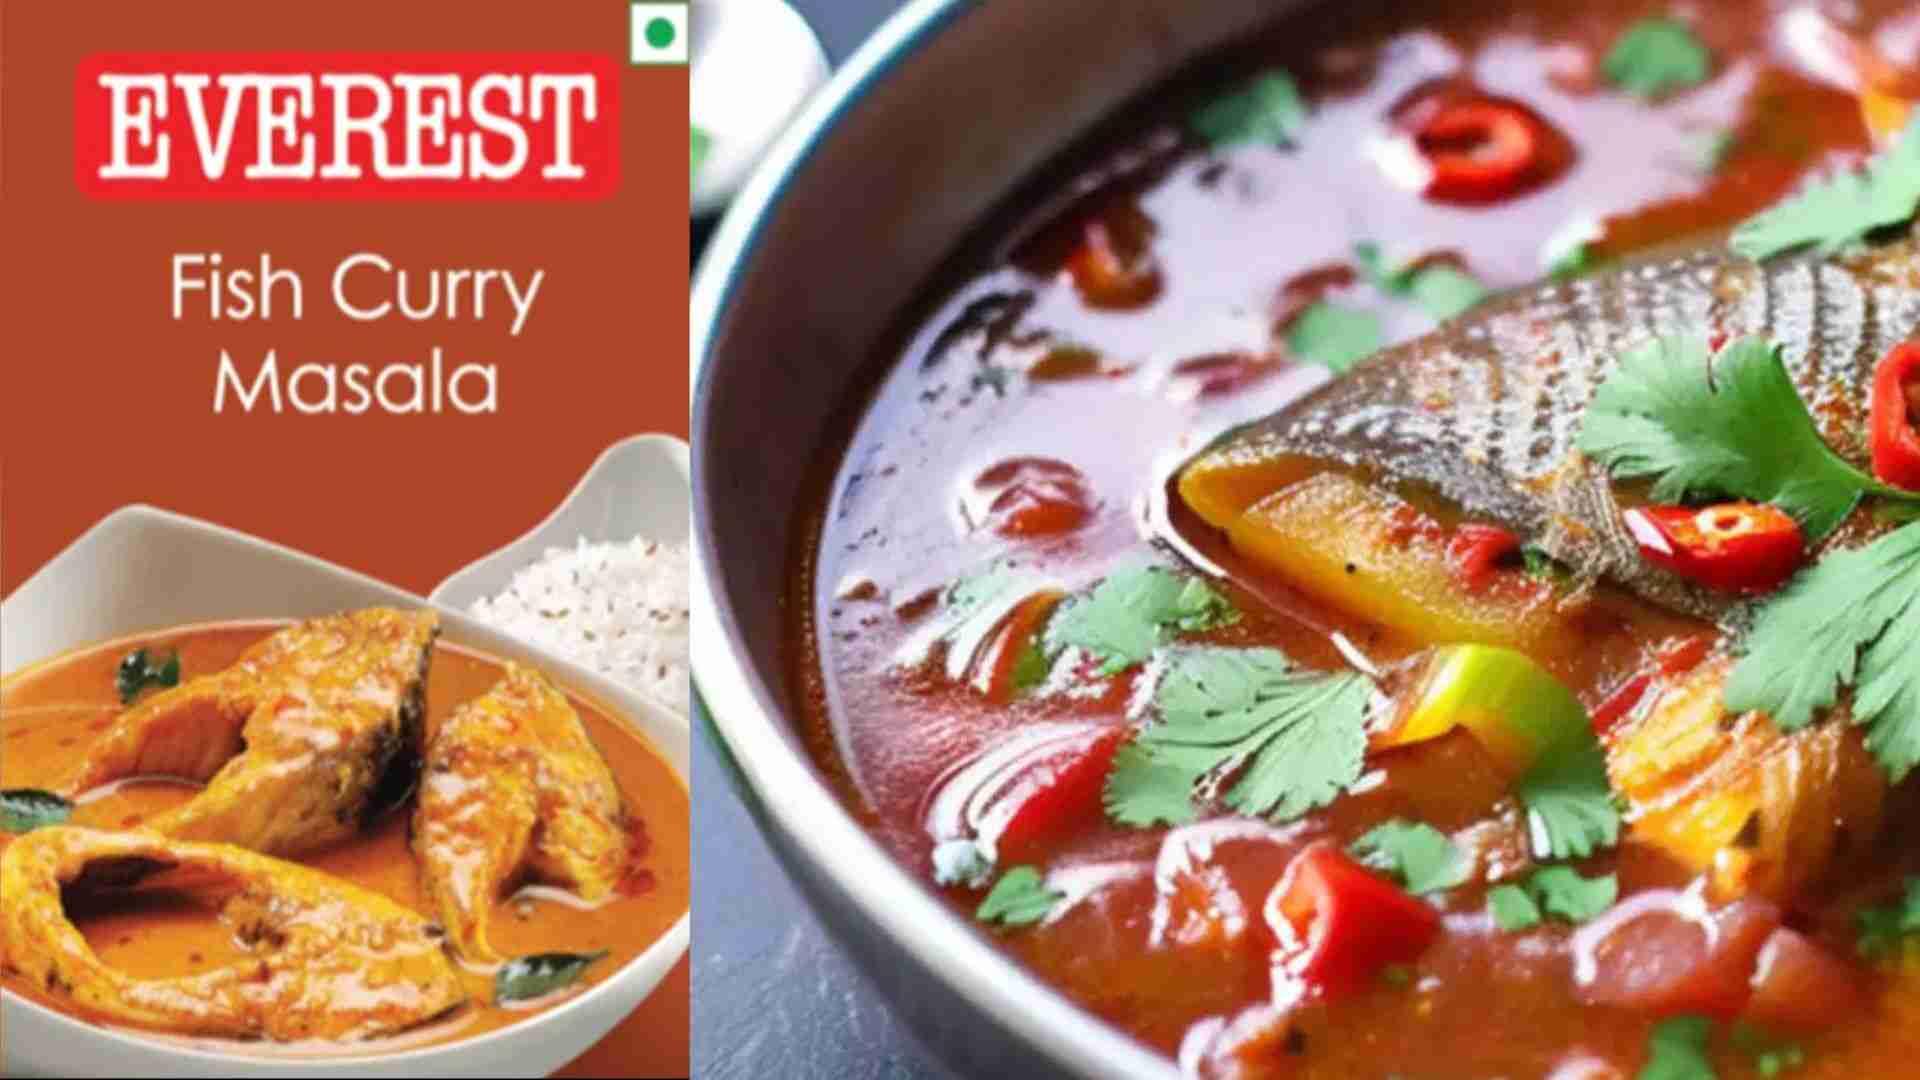 Singapore Food Agency recalls Everest’s Fish Curry Masala due to pesticide concerns